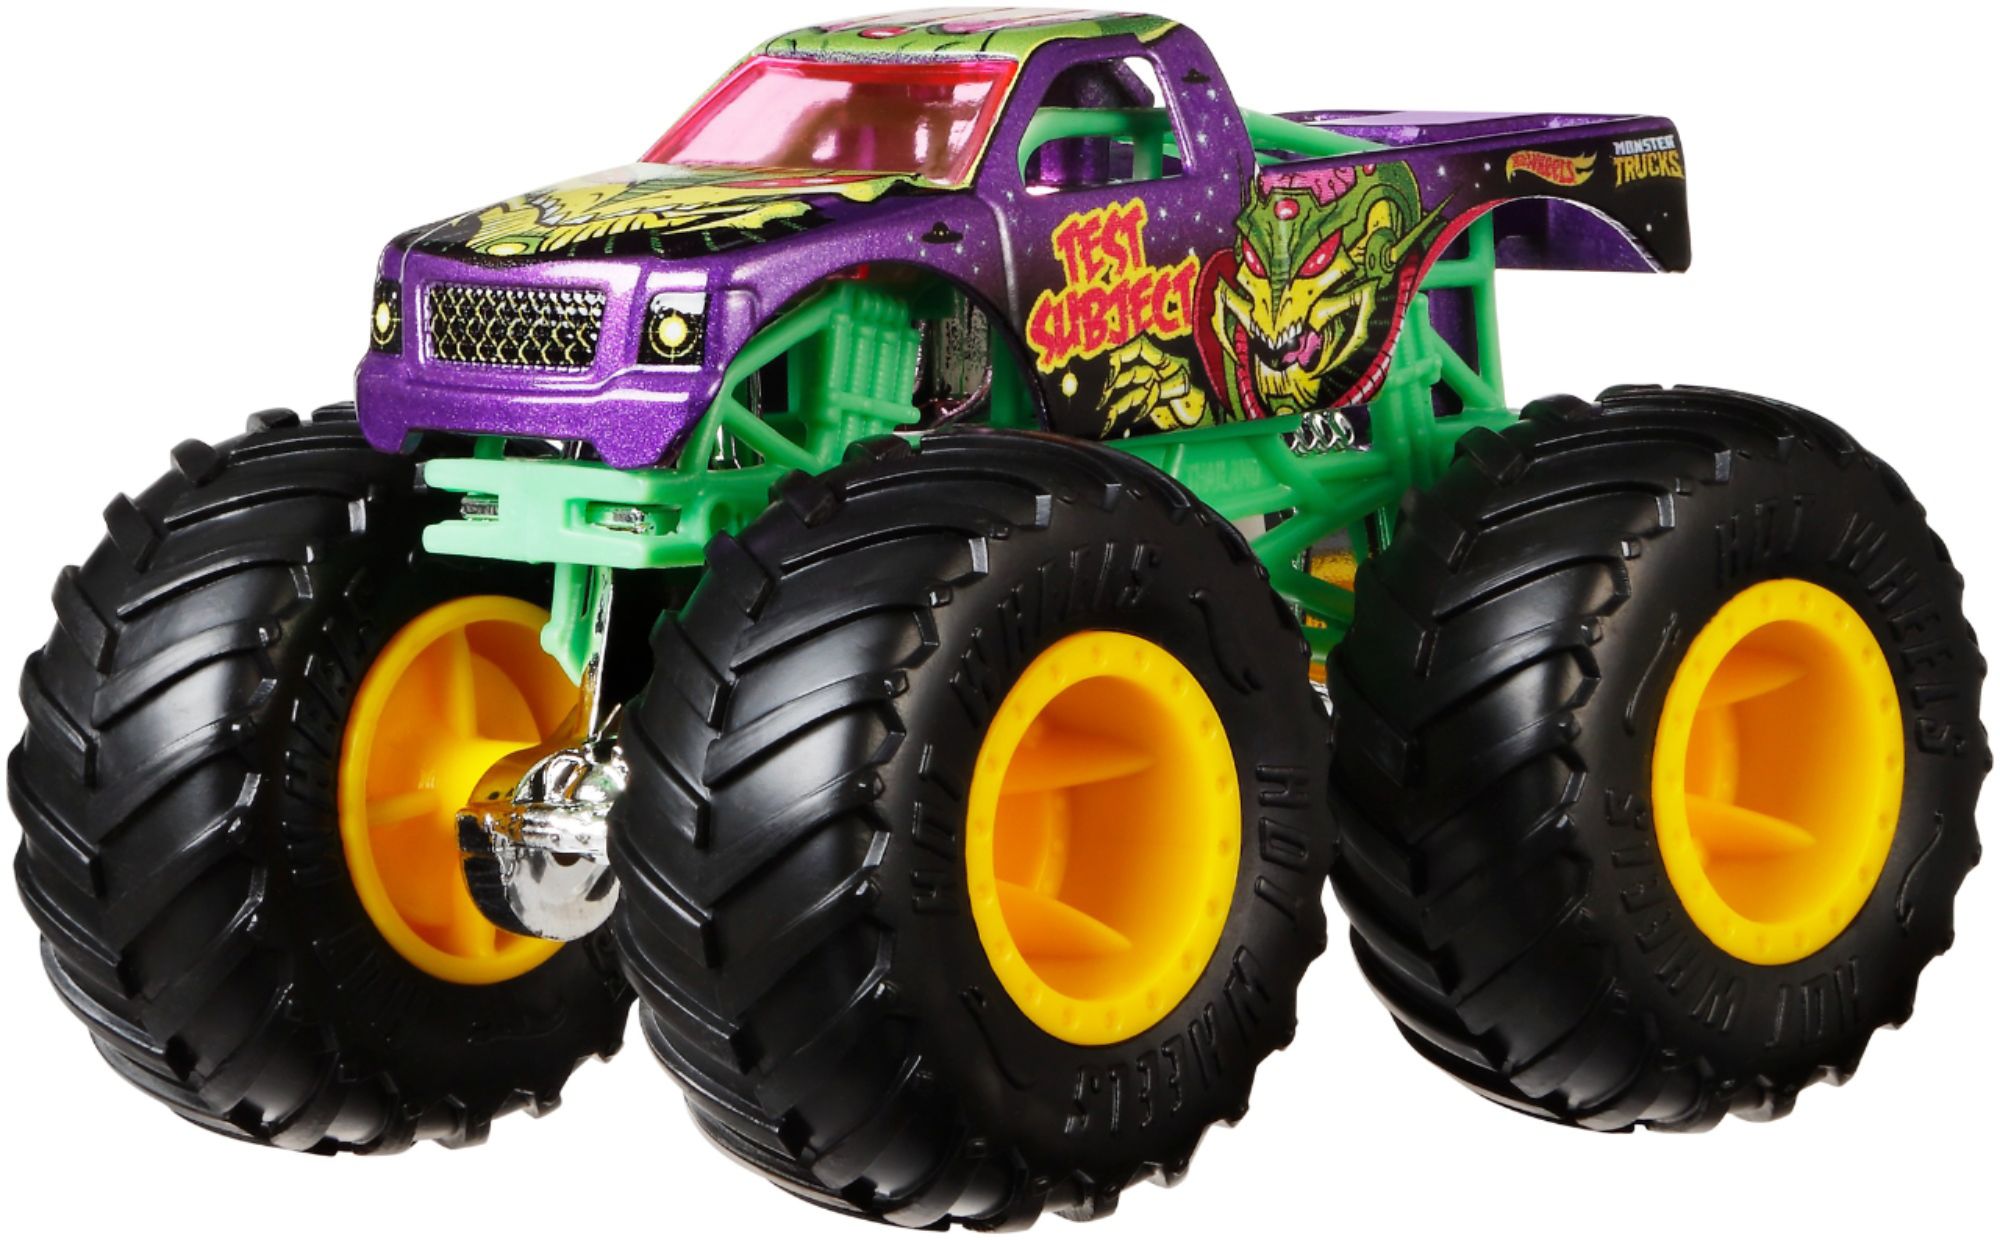 monster truck toy collection